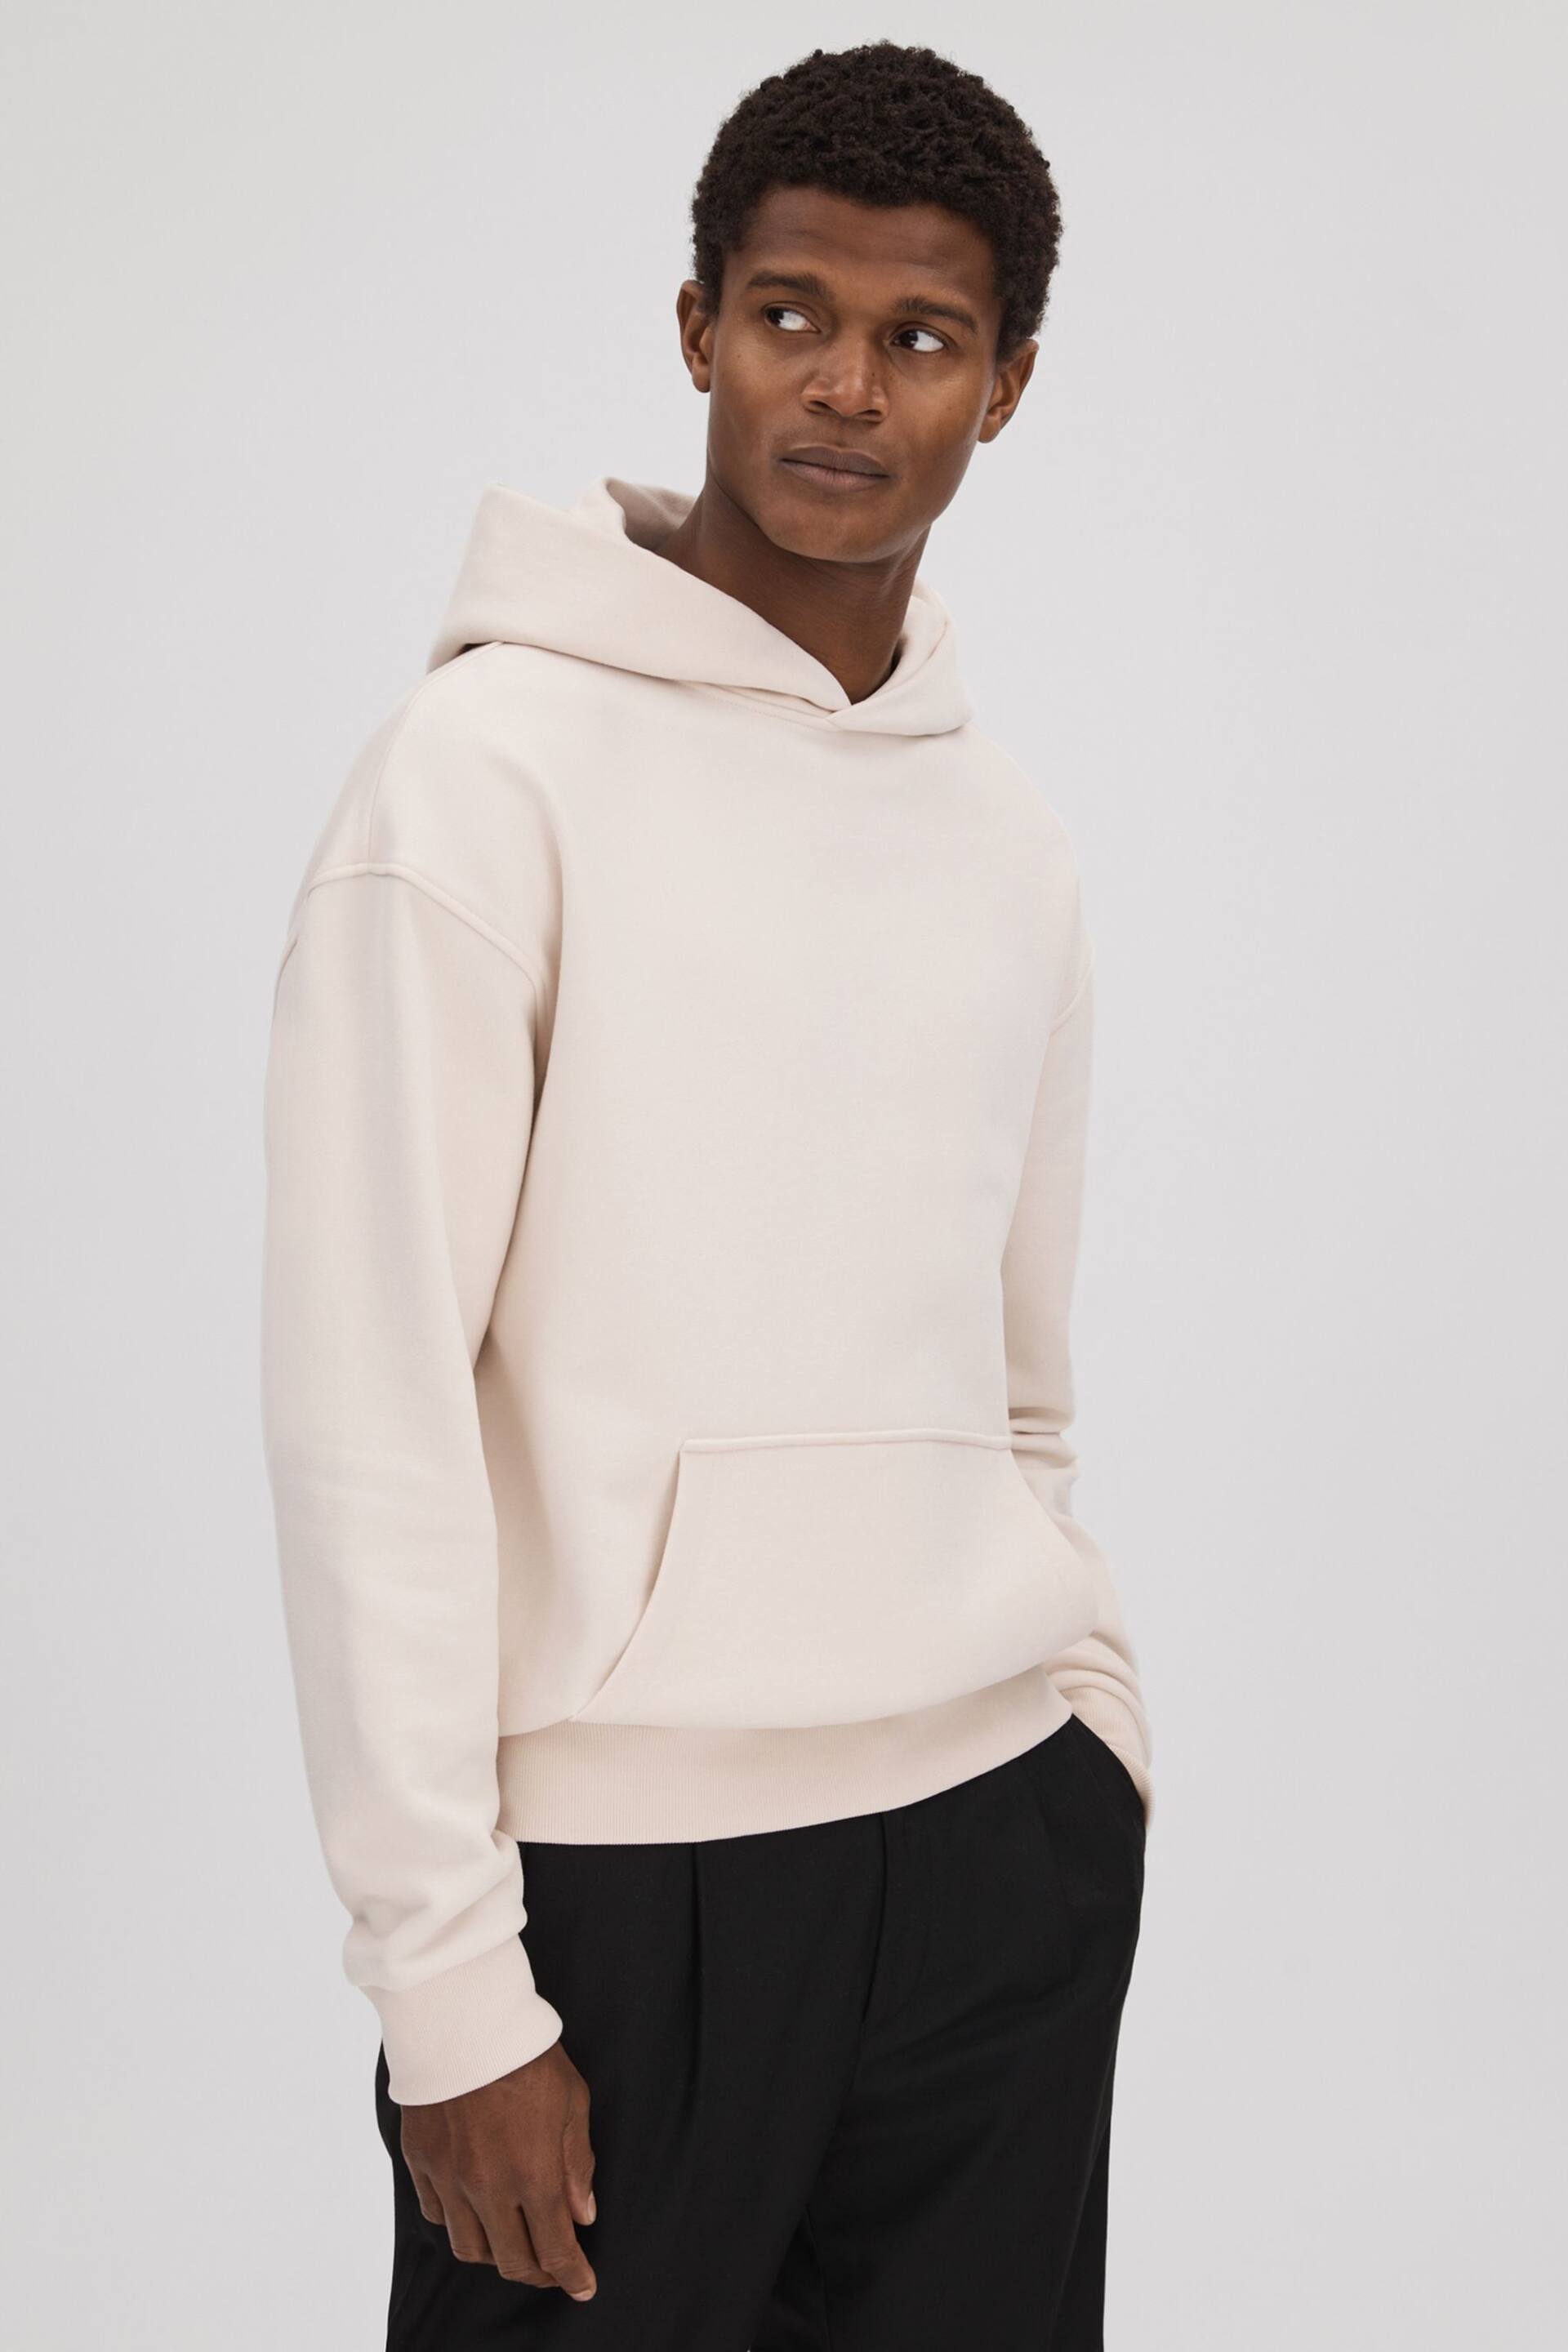 Reiss Off White Alexander Casual Fit Cotton Hoodie - Image 1 of 6